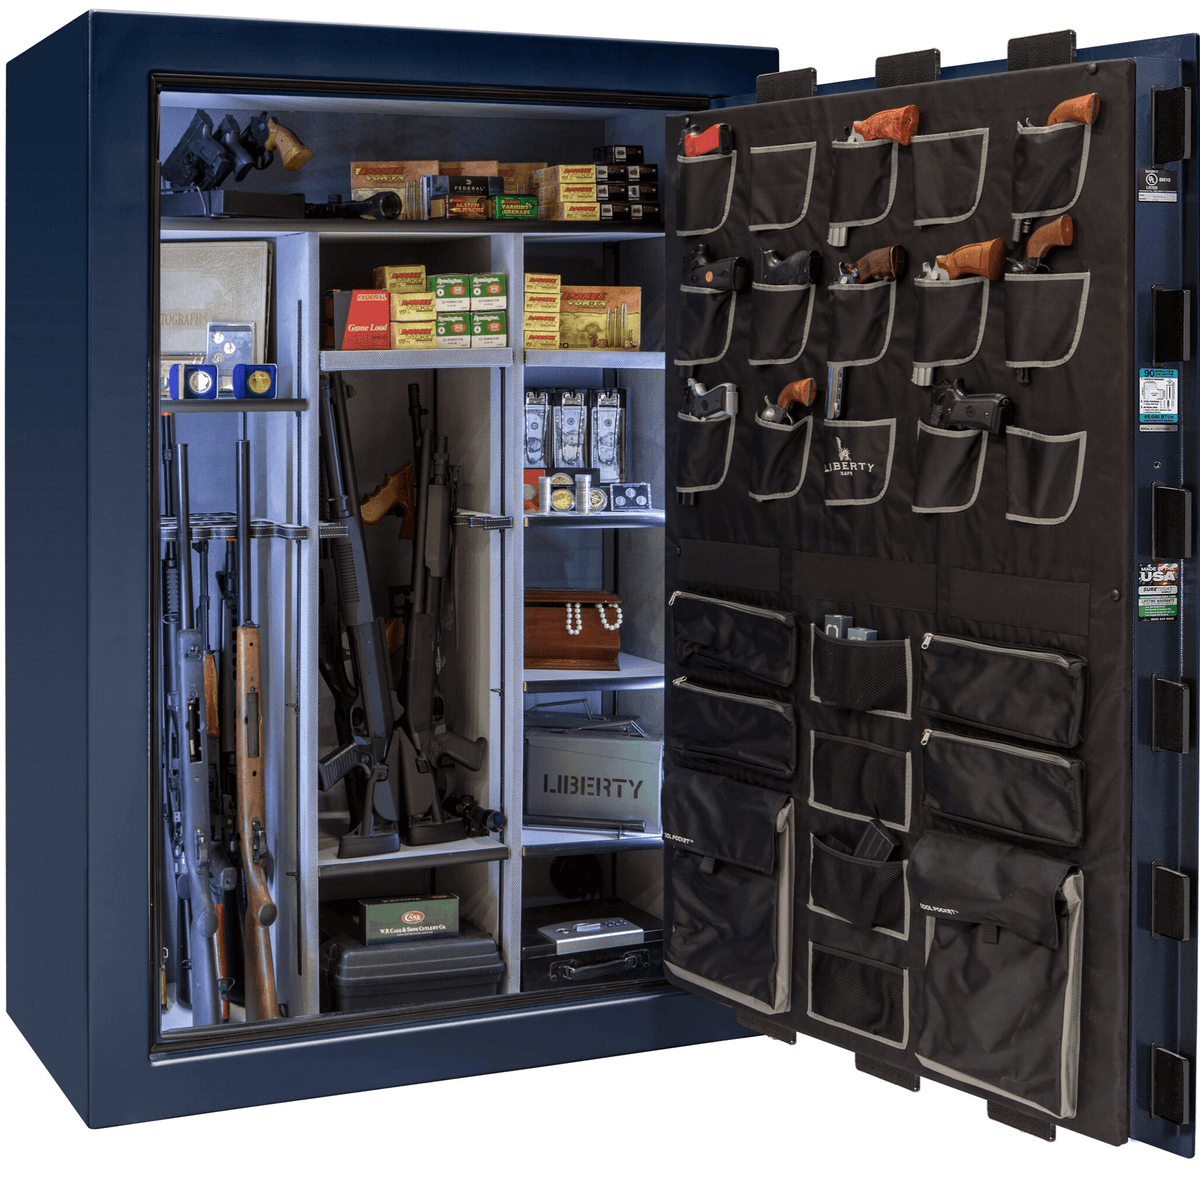 Liberty Classic Select Extreme Wide Body Safe in Blue Gloss, open.